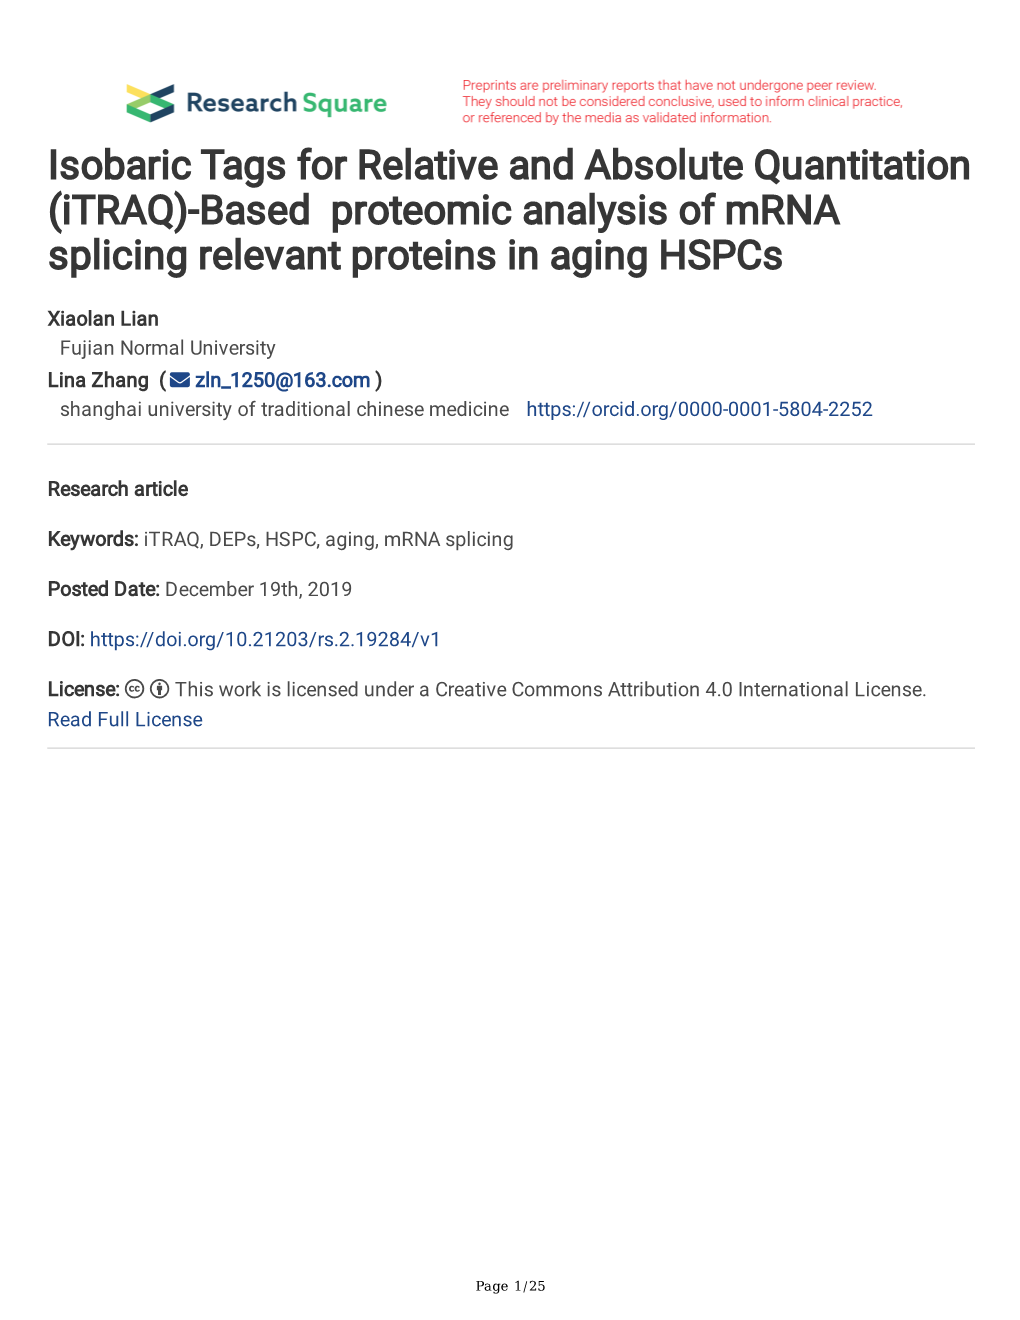 Based Proteomic Analysis of Mrna Splicing Relevant Proteins in Aging Hspcs